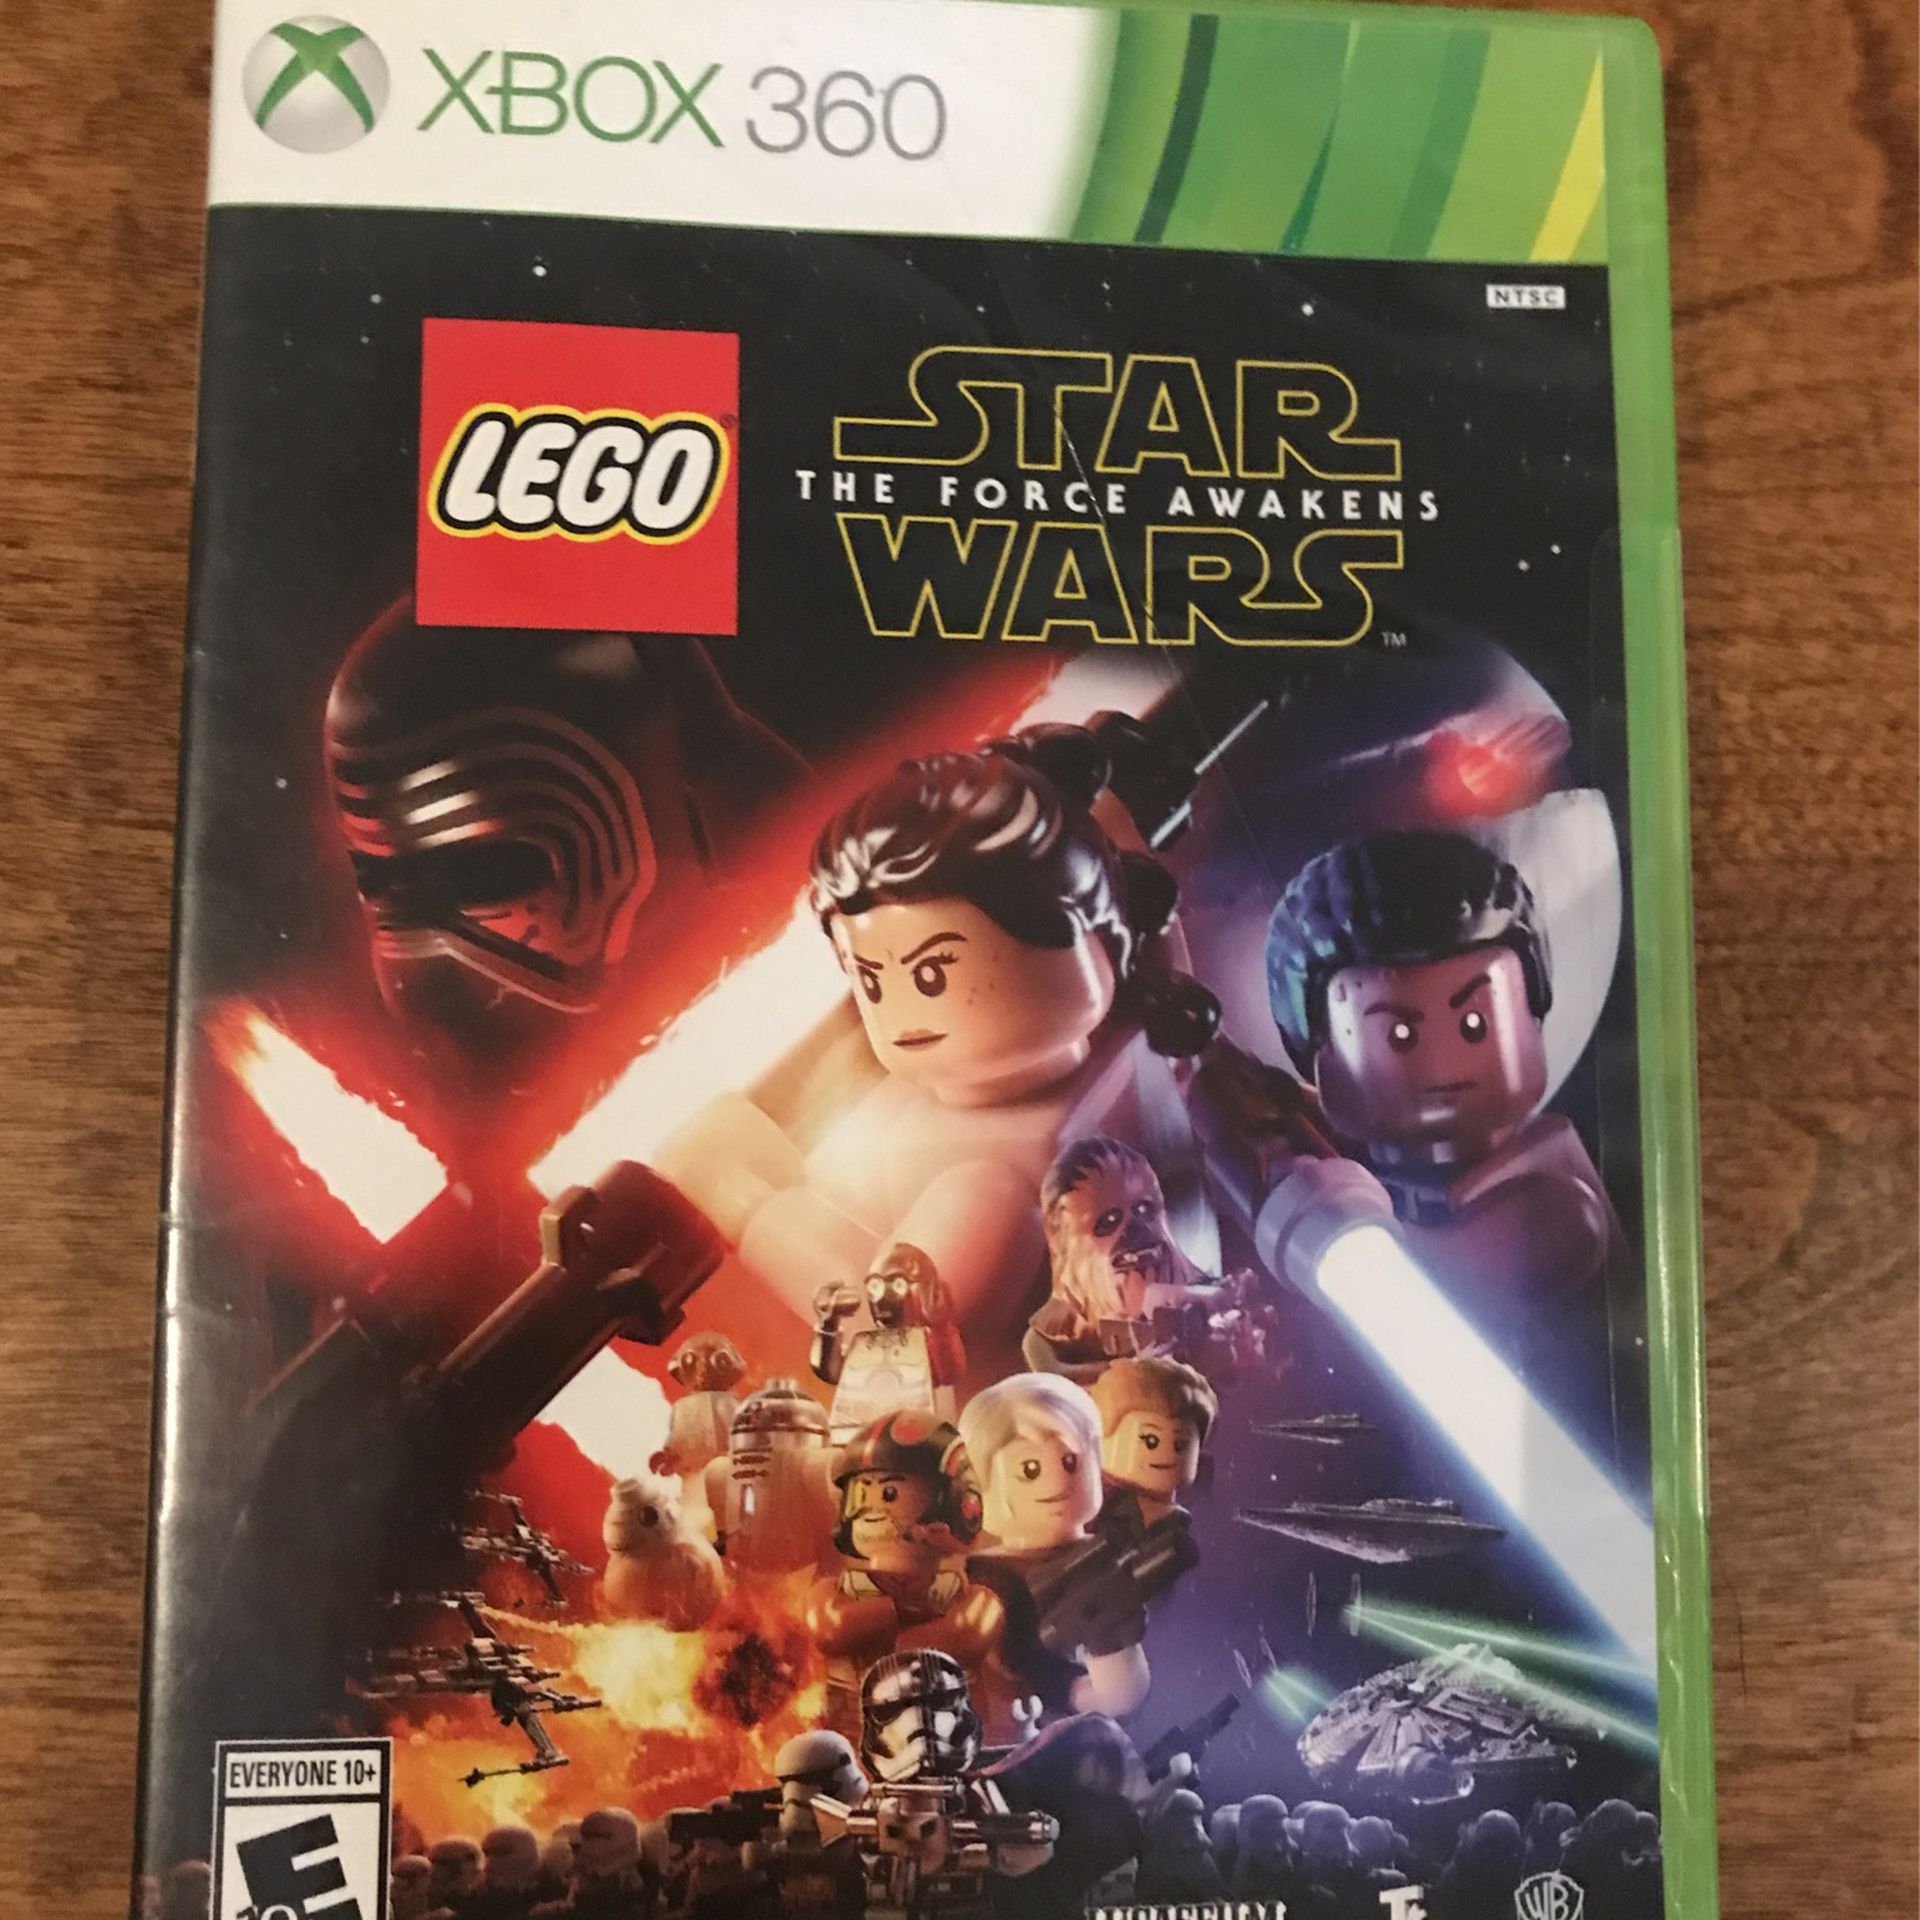 Lot Of 4 Random Microsoft Xbox 360 Video Games All For $20 for Sale in  Fresno, CA - OfferUp